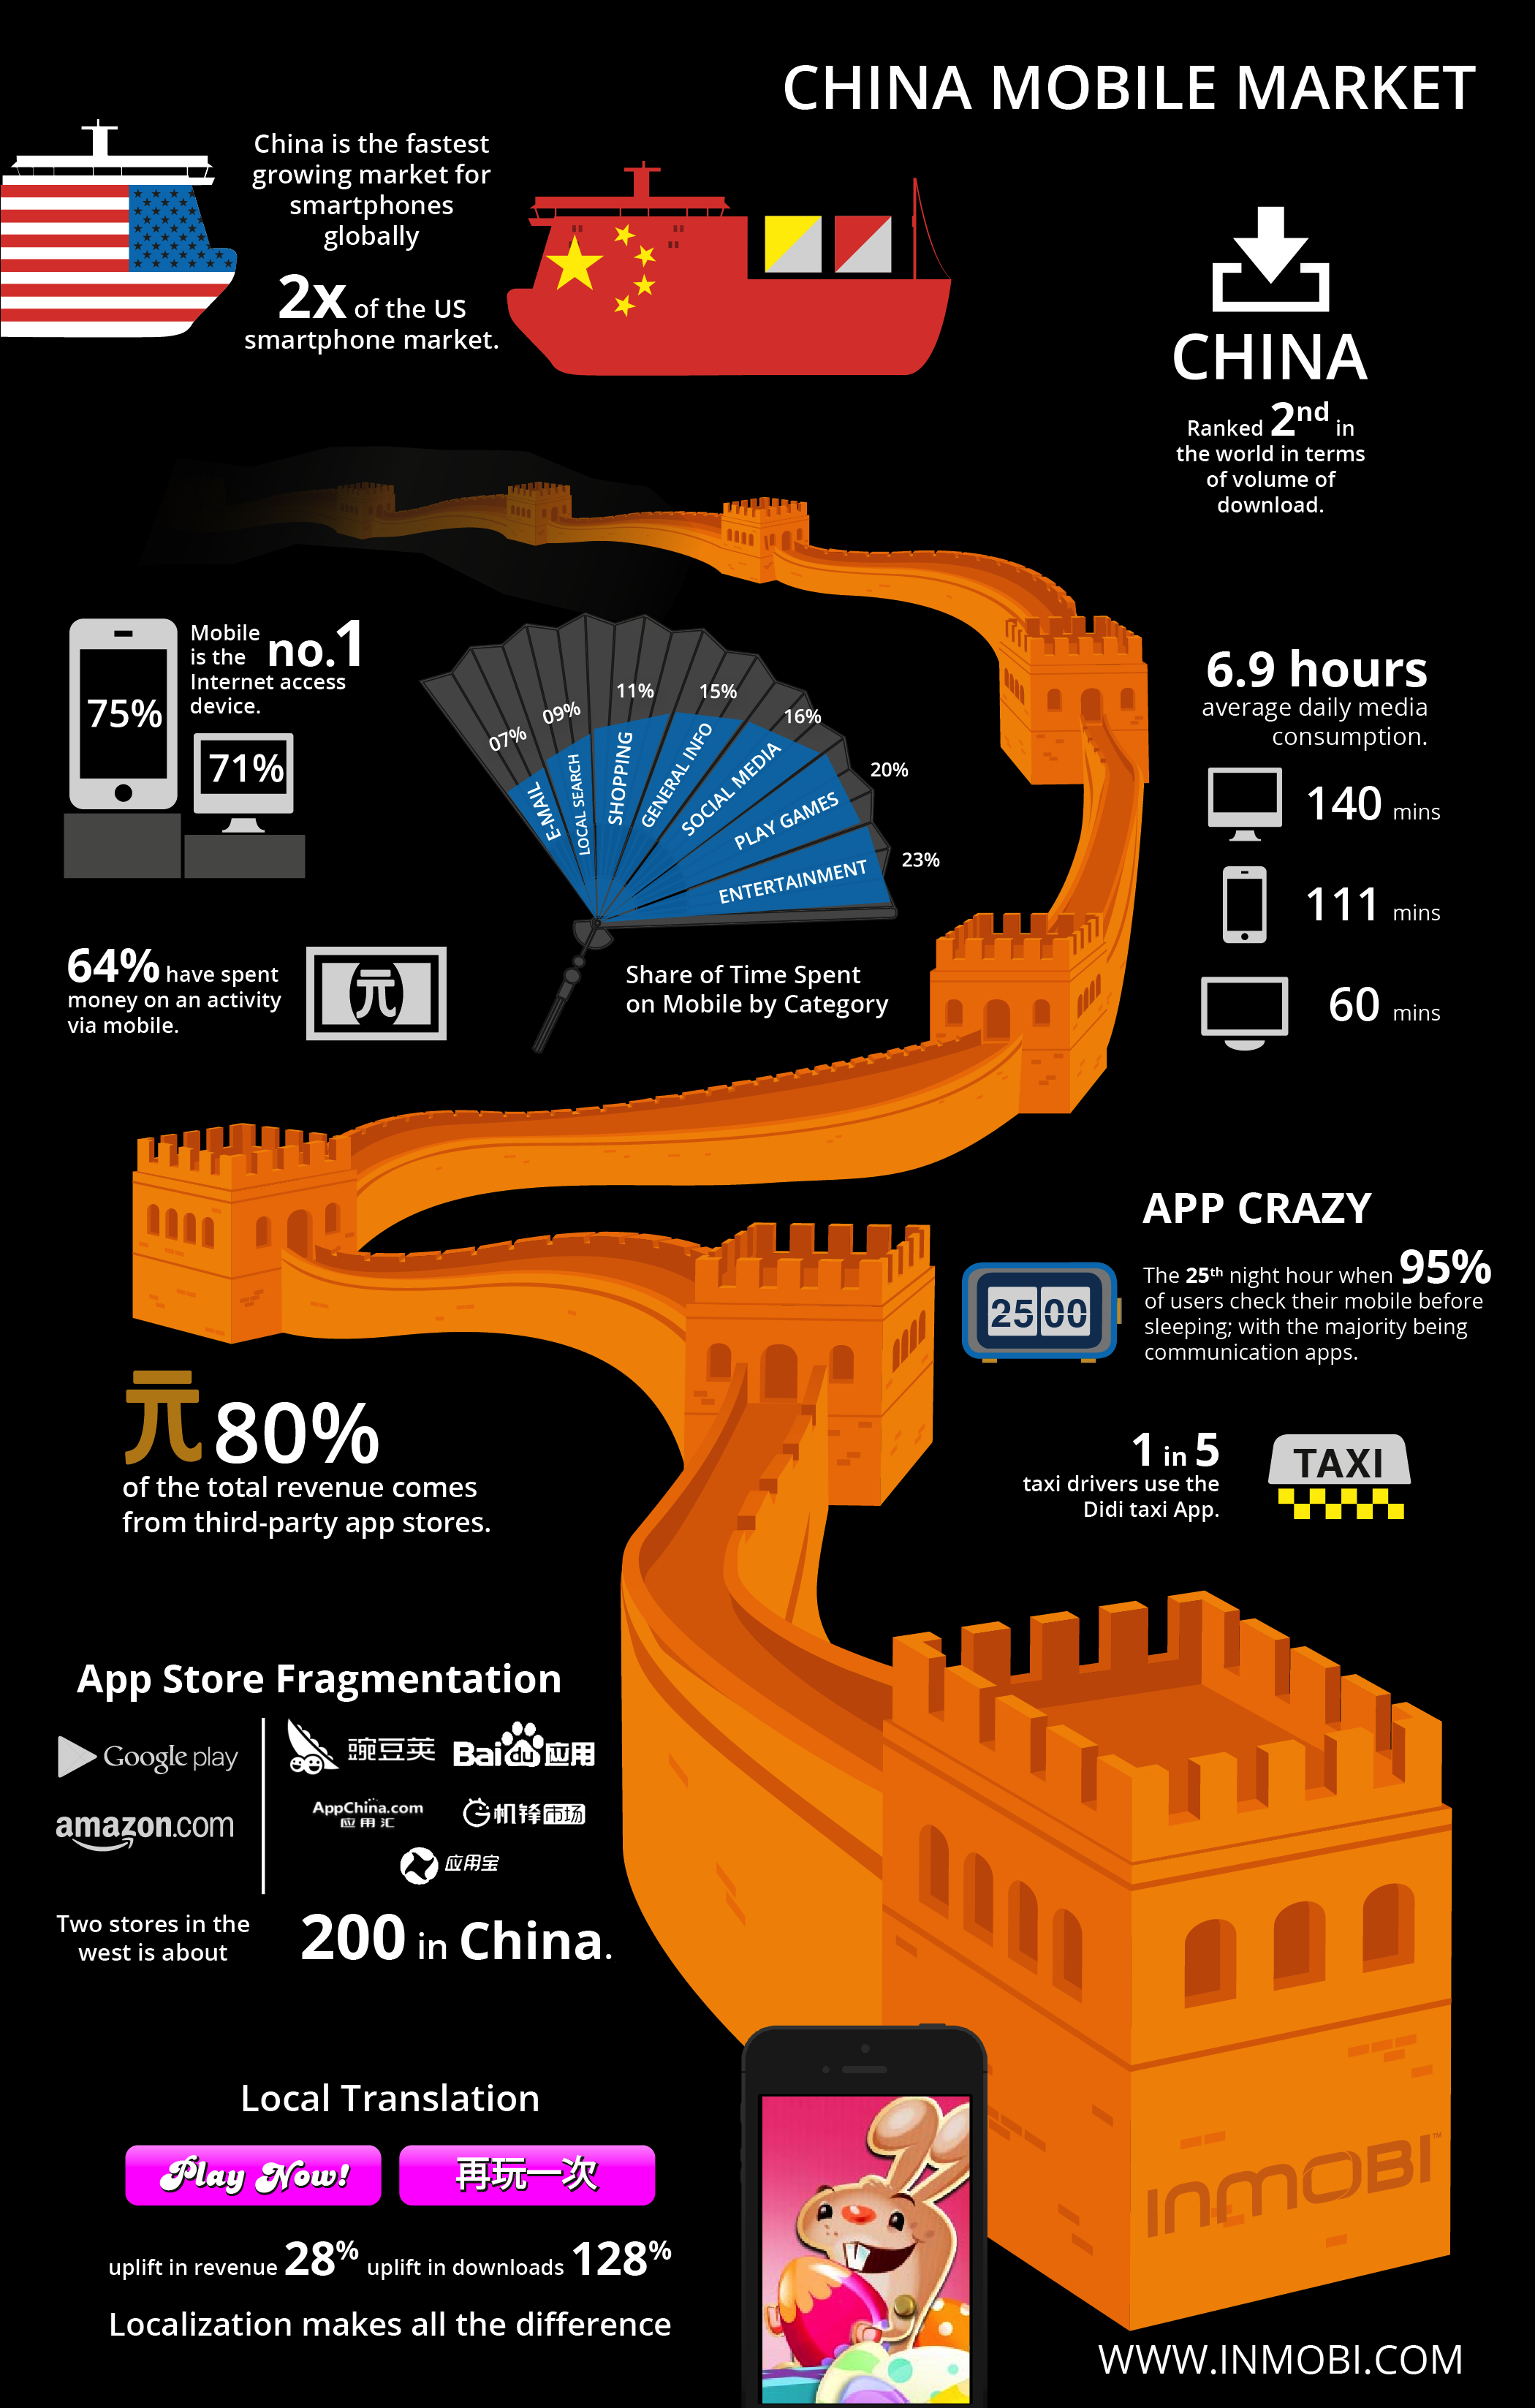 Go East101: China Mobile Market Insights [Infographic]